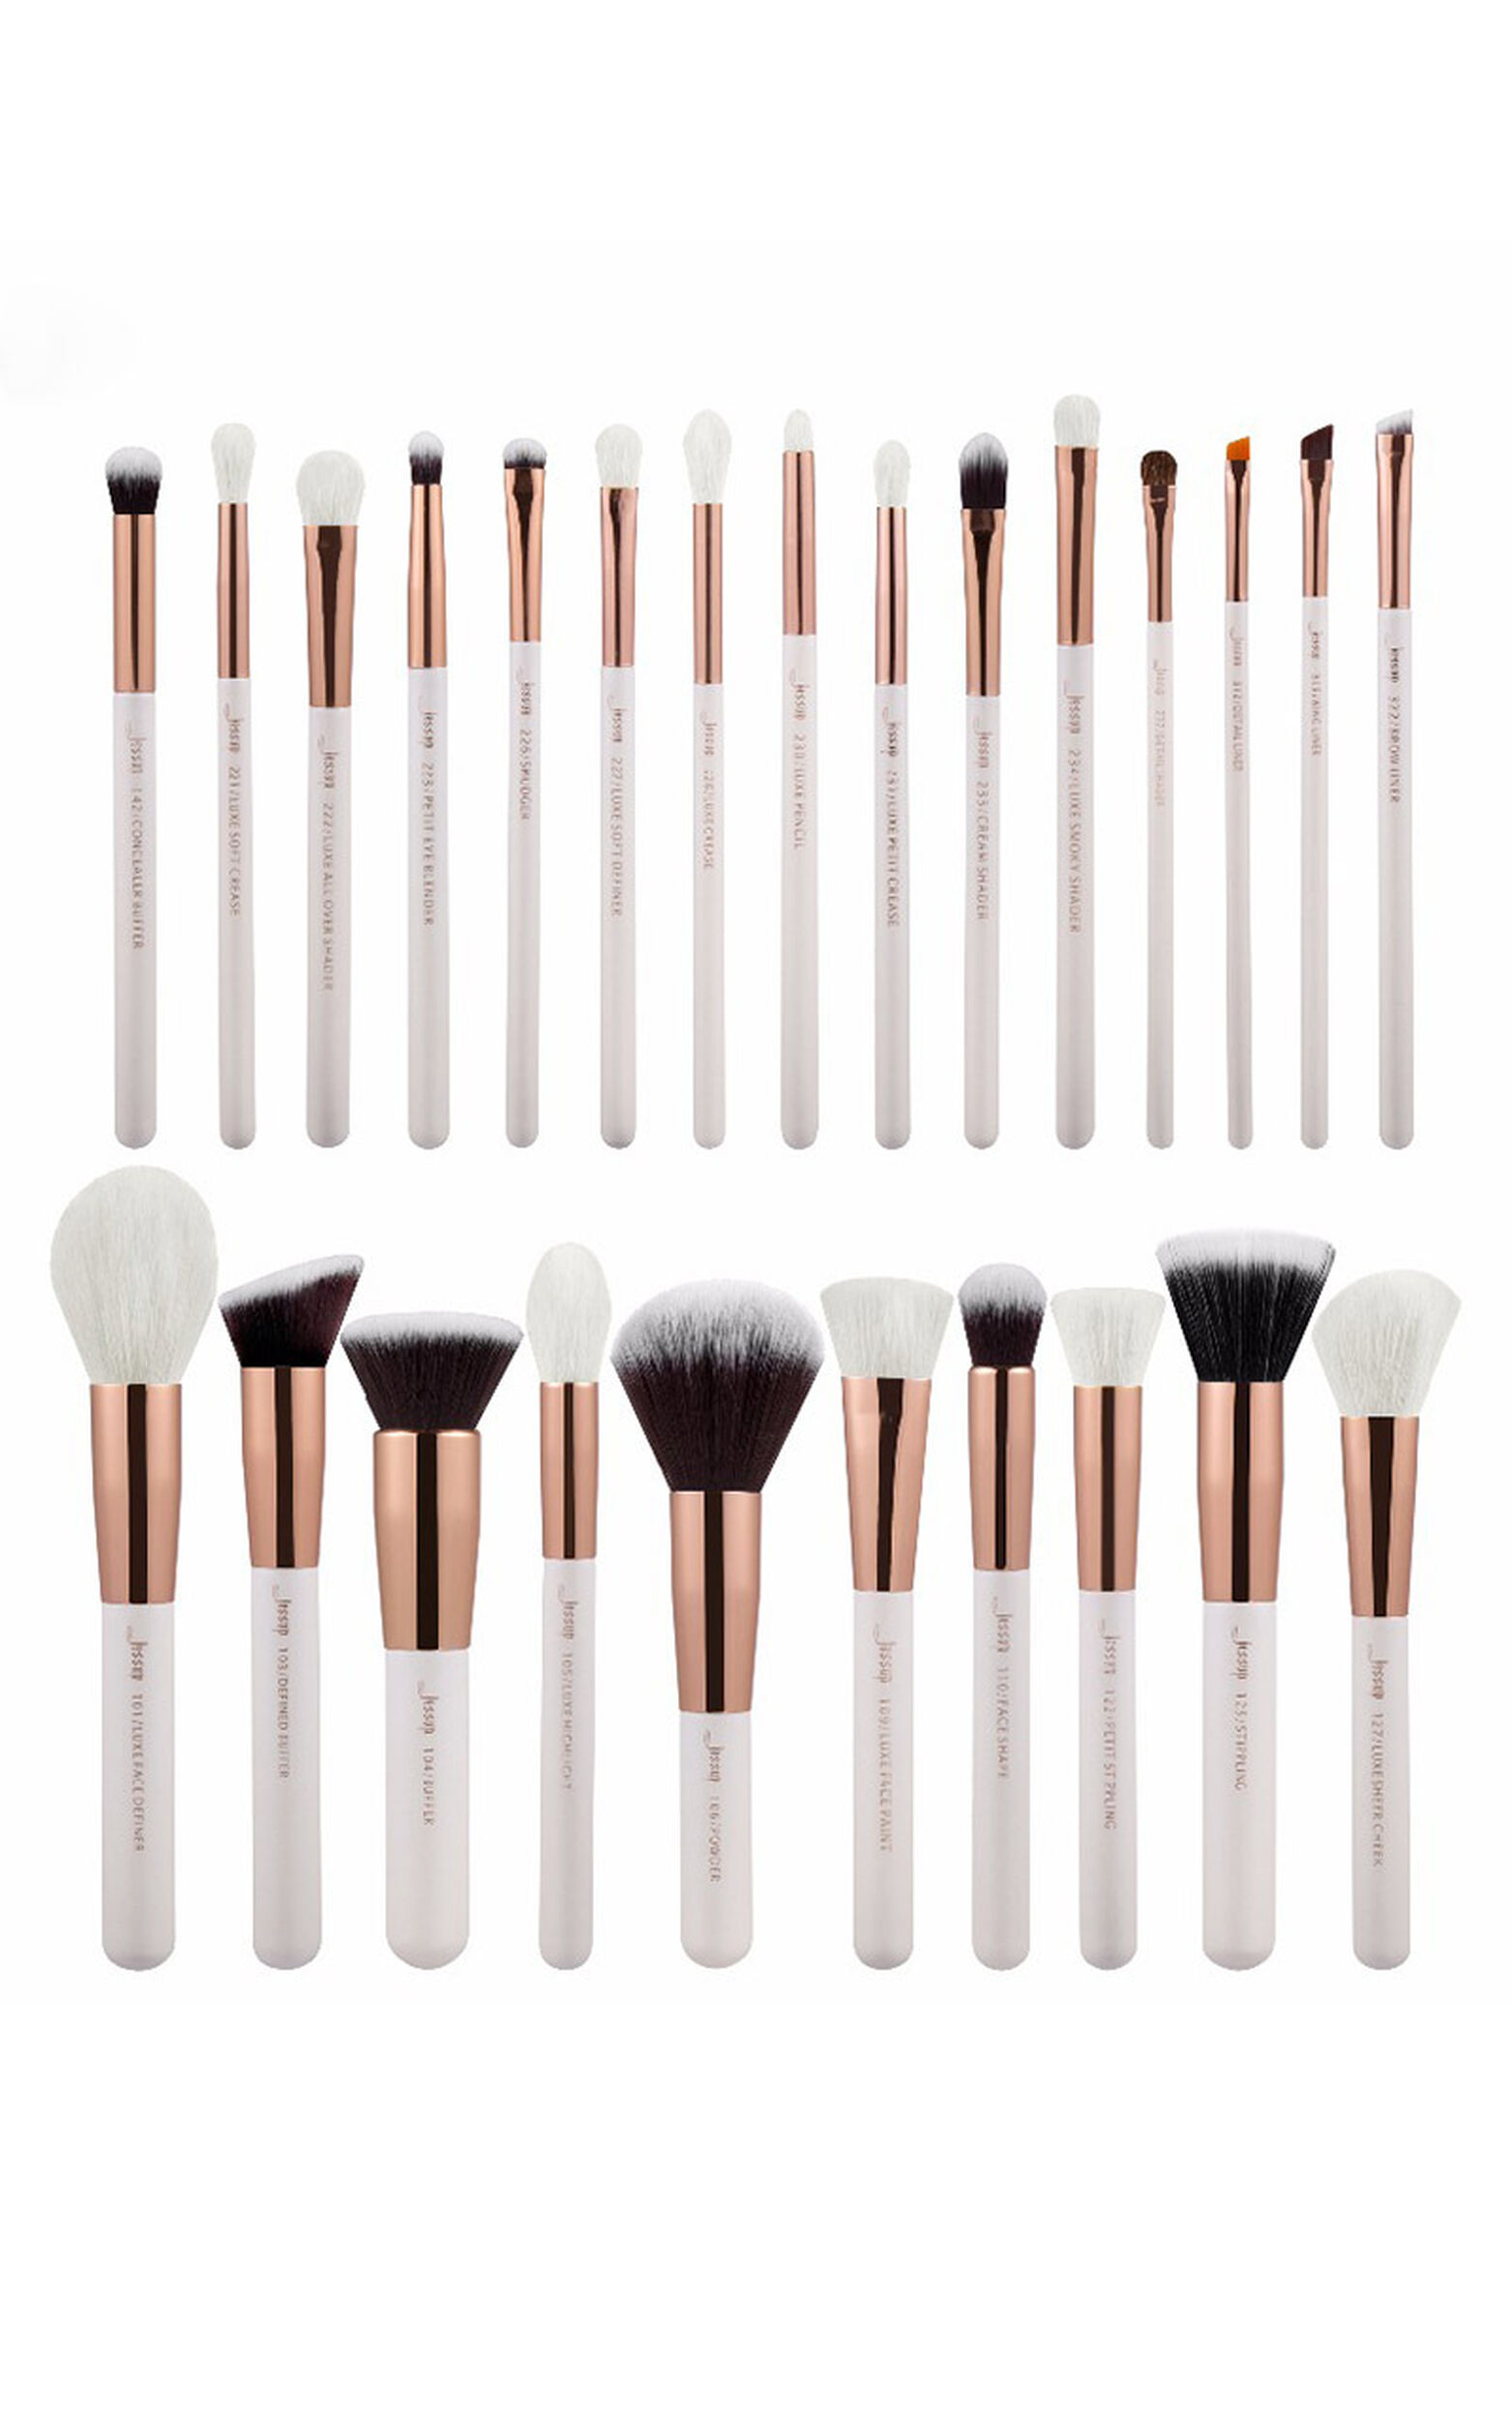 Makeup brush set in white and rose gold - 25 pc, WHT1